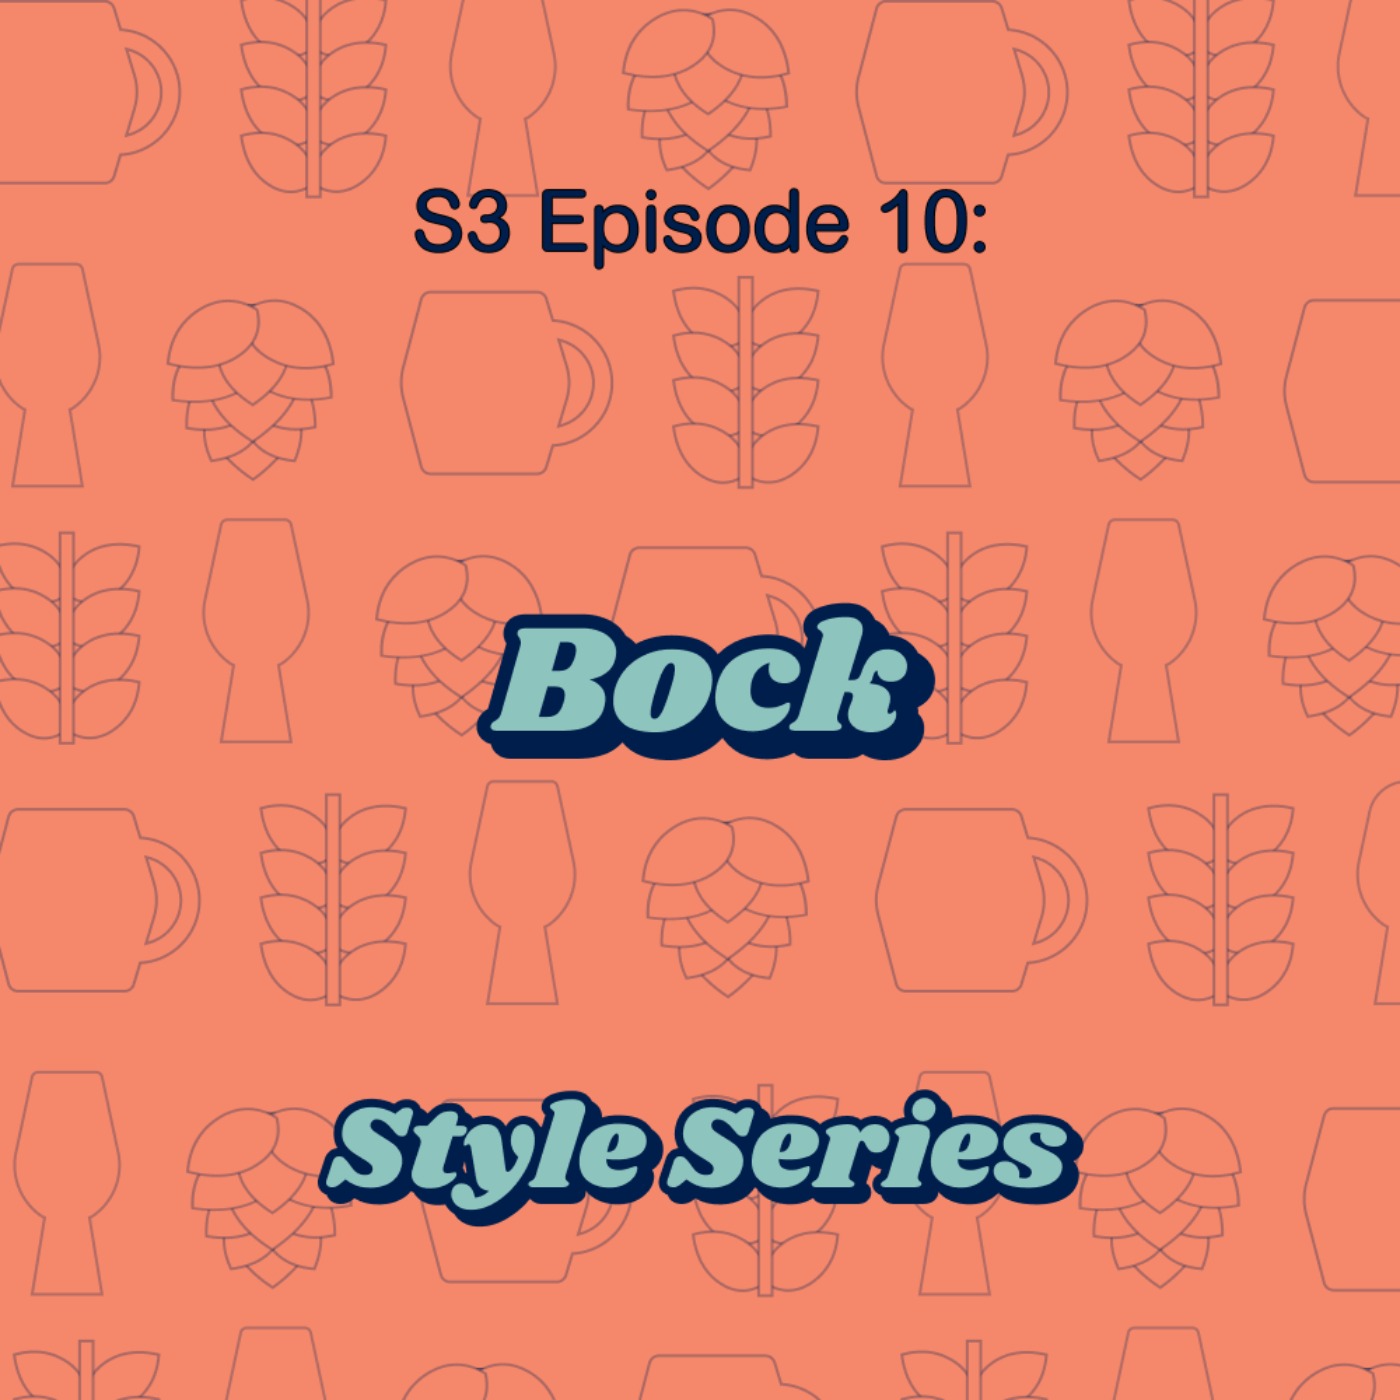 Bock - Style Guide